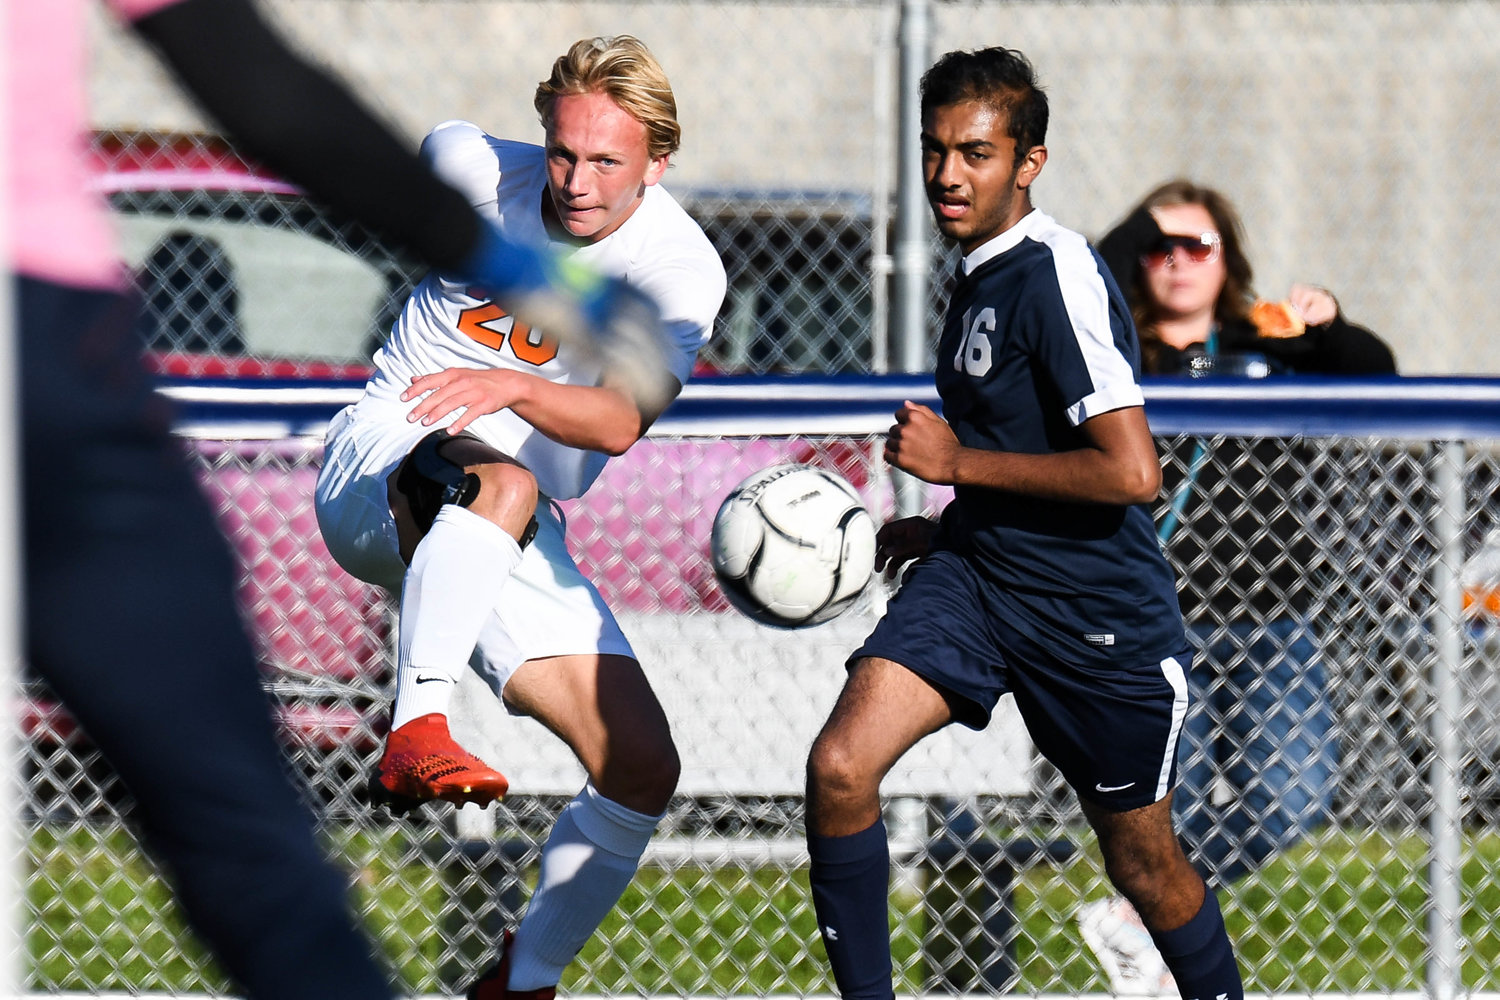 Rome Free Academy player Paul Zimmerman, left, kicks the ball toward the the net as Central Valley Academy's Om Patel defends during the game on Thursday in Ilion. RFA won 2-0 and Zimmerman contributed an assist.